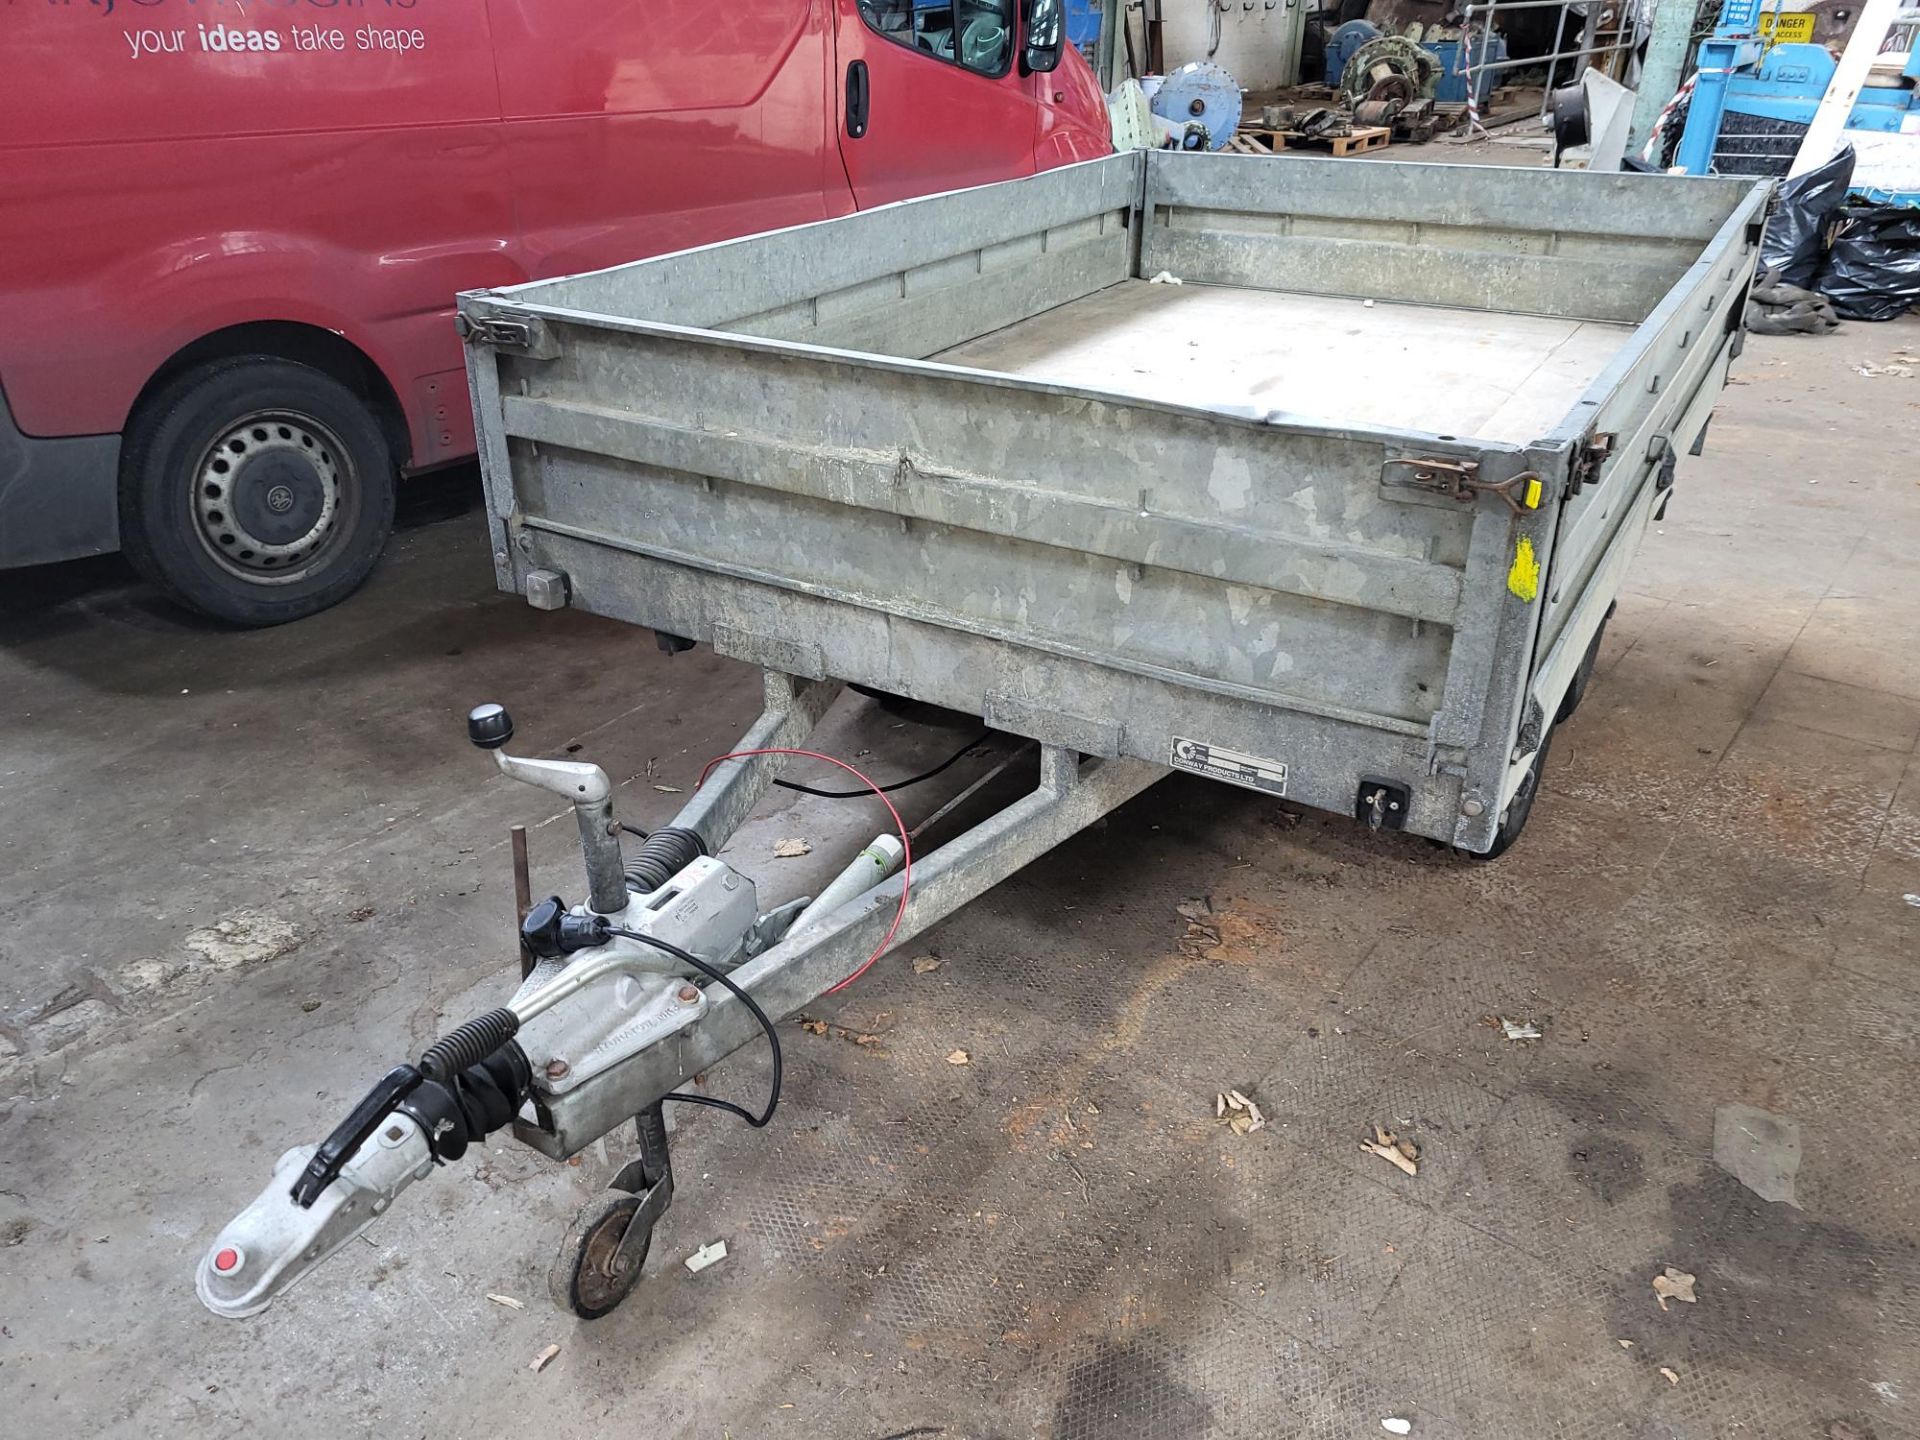 Conway Products Limited / Glidalong WM2000 1.6m x 2.5m Galvanised Steel Twin Axle Dropside Trailer - Image 4 of 6